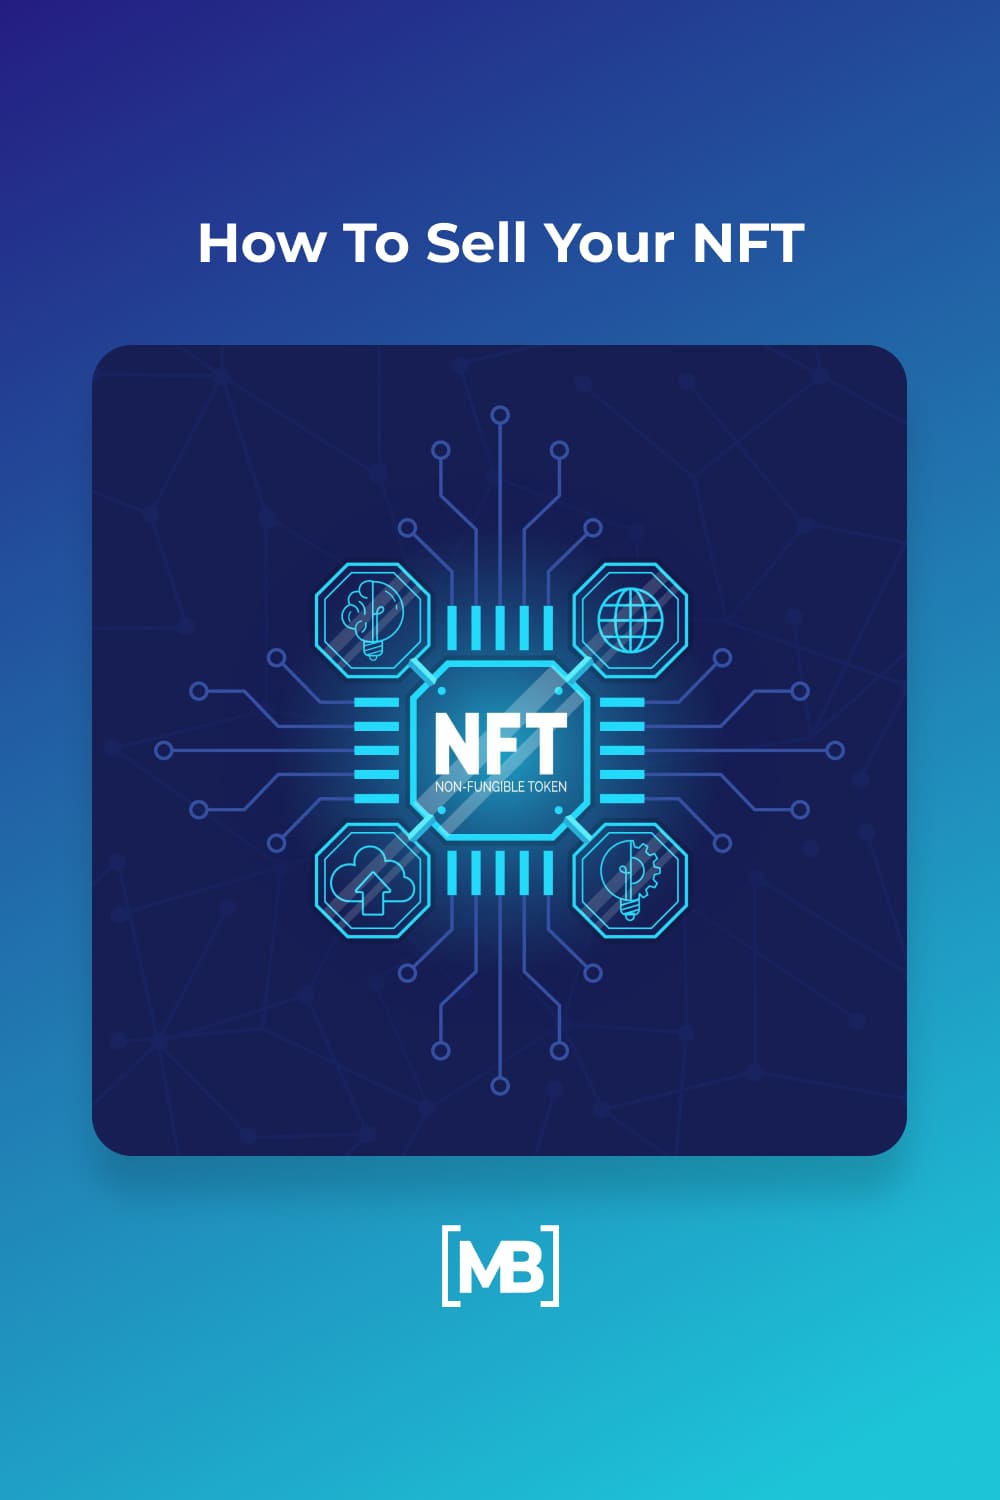 11 How To Sell Your NFT